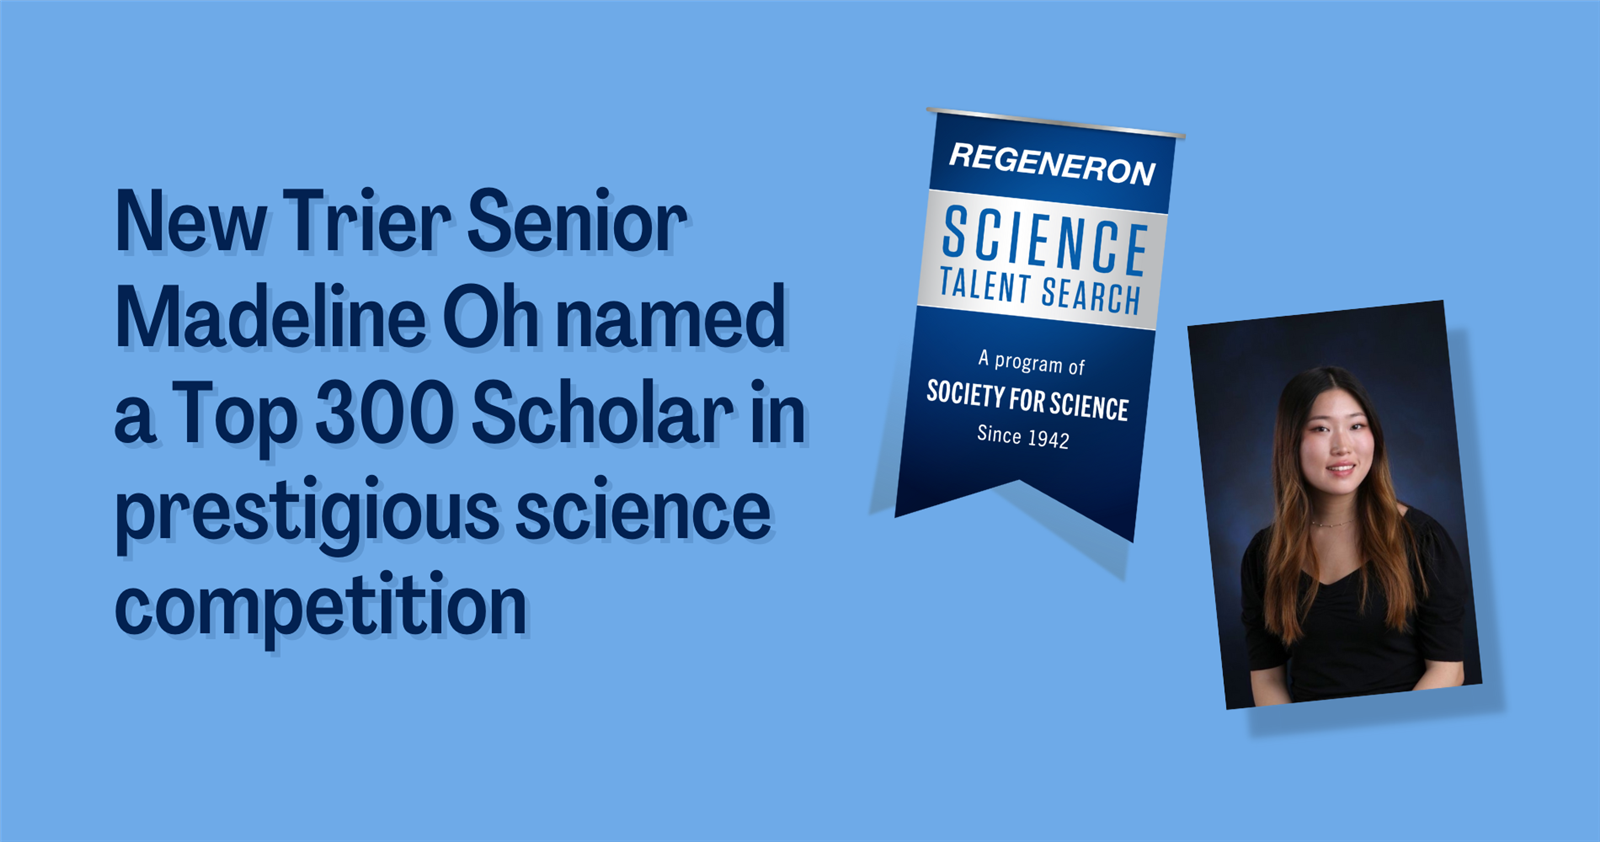  New Trier Senior Madeline Oh named a Top 300 Scholar in prestigious science competition